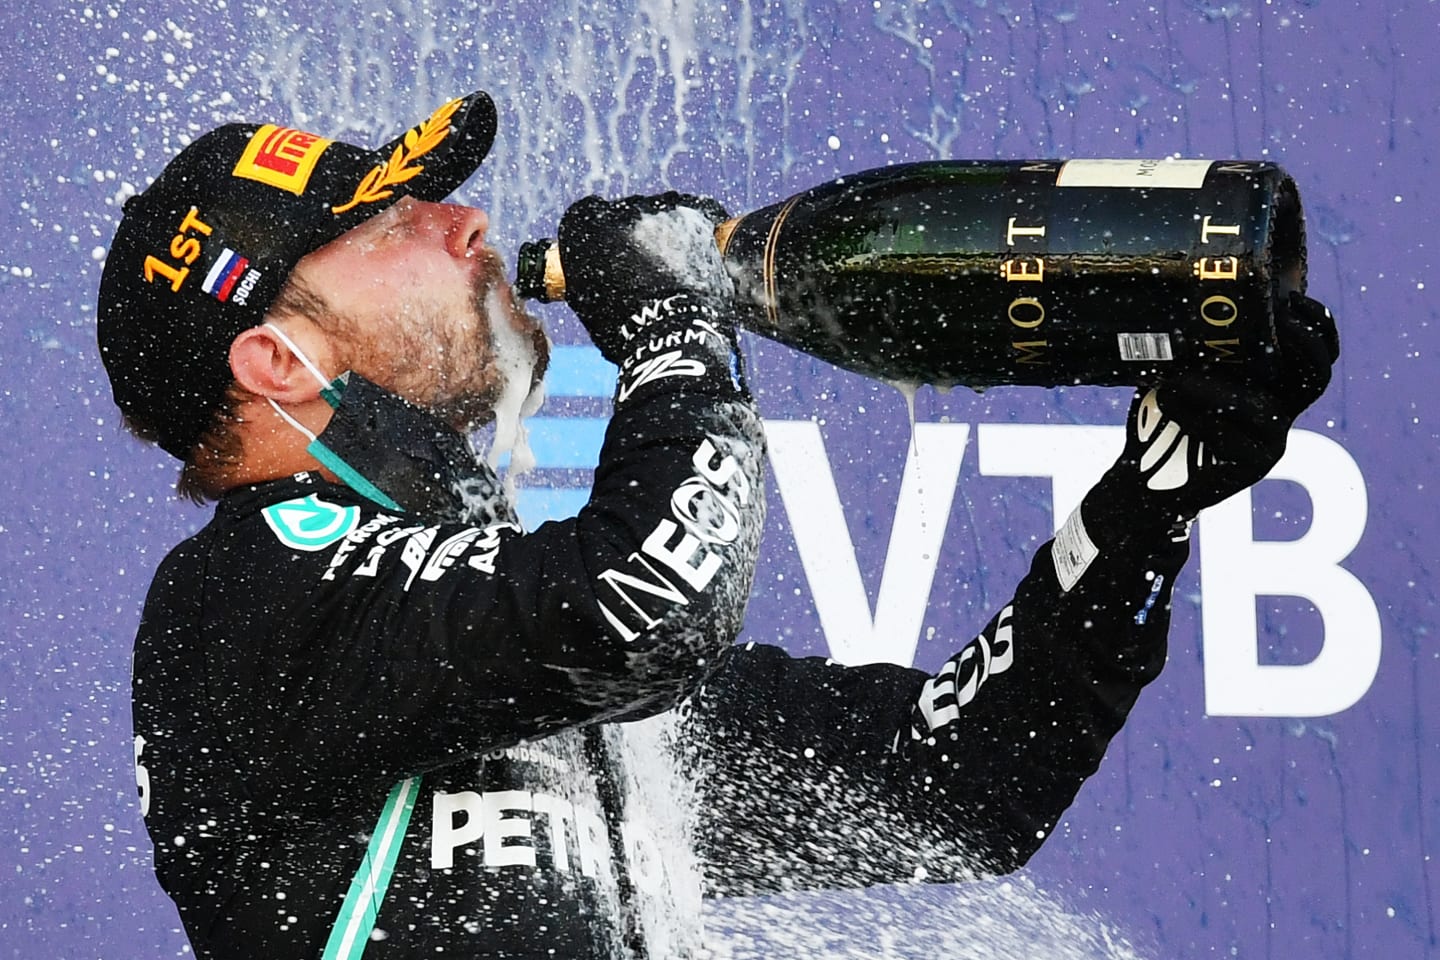 SOCHI, RUSSIA - SEPTEMBER 27: Race winner Valtteri Bottas of Finland and Mercedes GP celebrates on the podium during the F1 Grand Prix of Russia at Sochi Autodrom on September 27, 2020 in Sochi, Russia. (Photo by Dan Mullan/Getty Images)